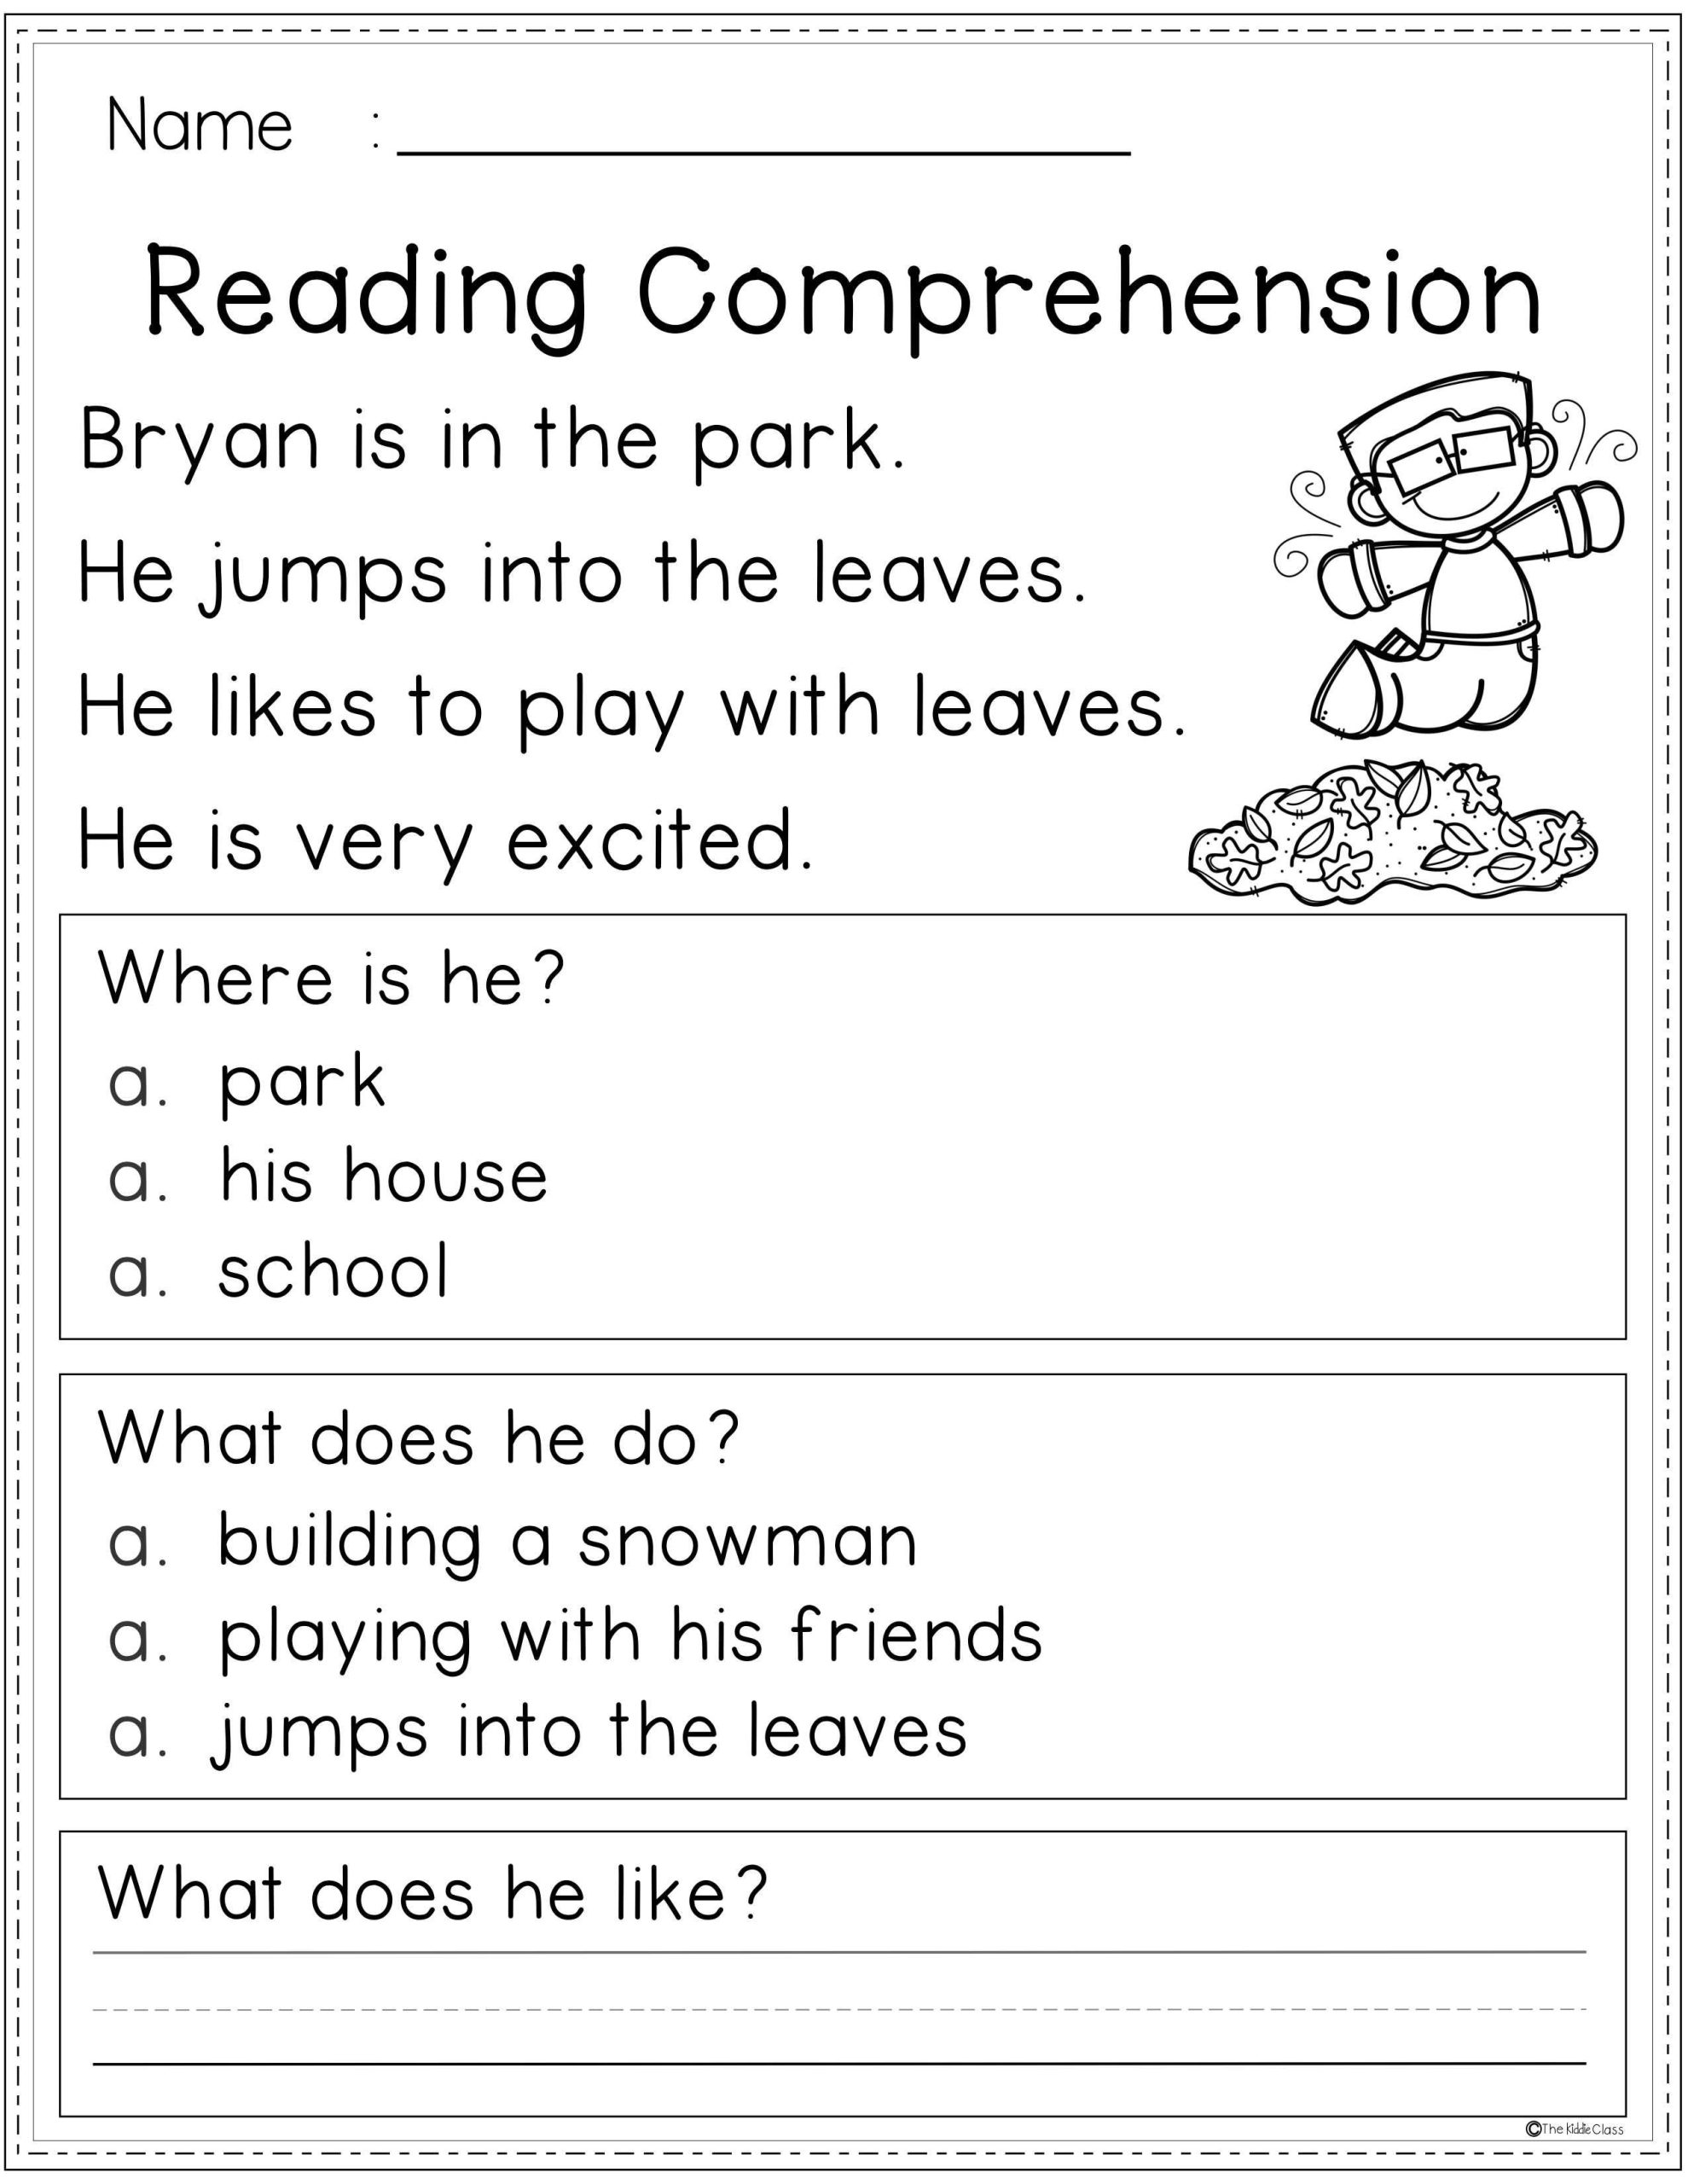 Year 1 Reading Comprehension